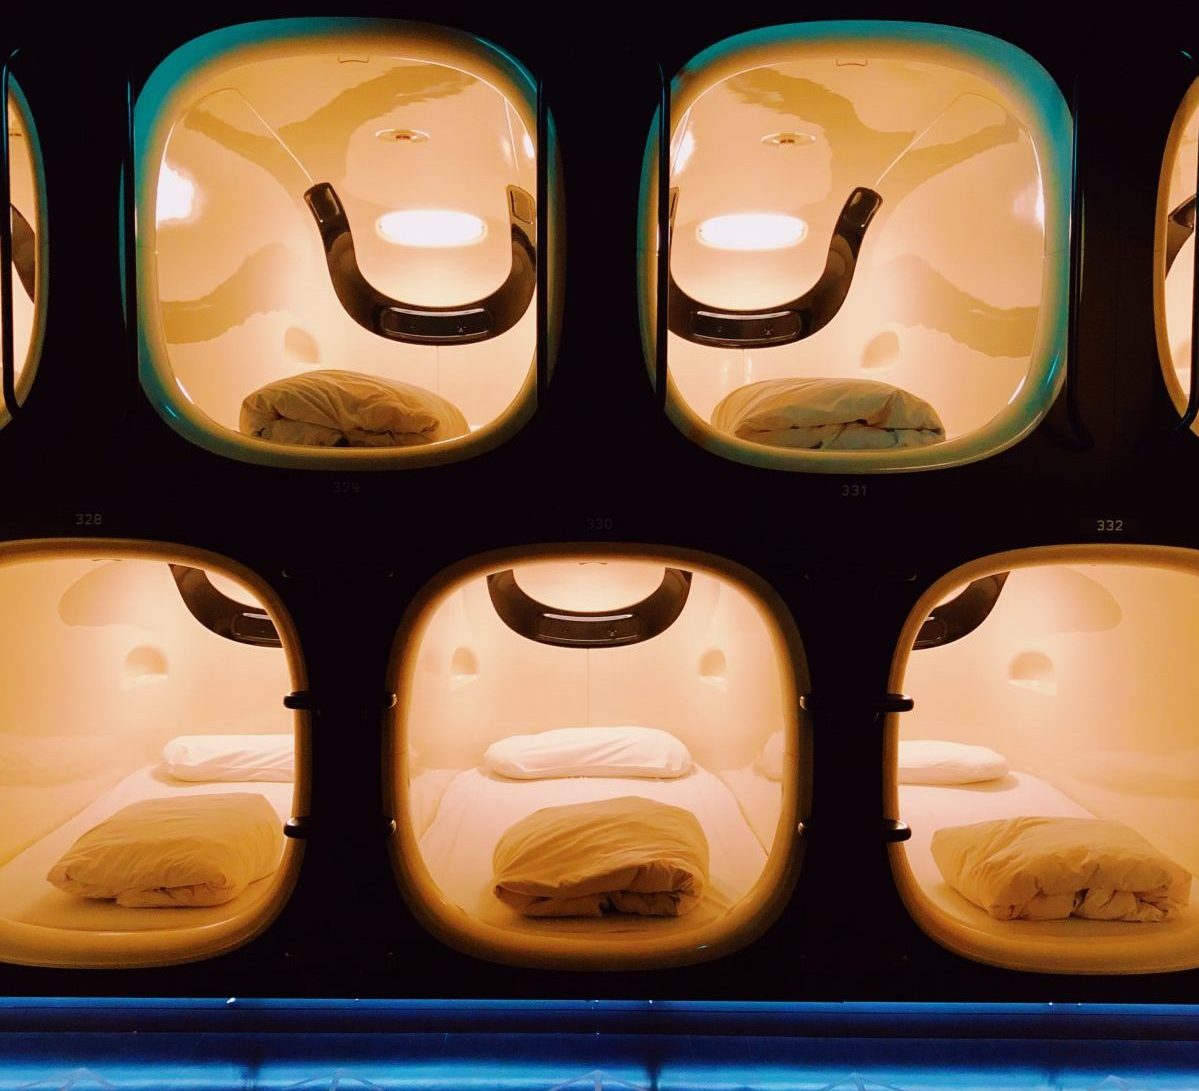 Photo of beds within small square-ish capsules with the blankets folded on top of the mattresses and the yellow lights on in each capsule, all built within a dark black wall and with capsule numbering on the floor